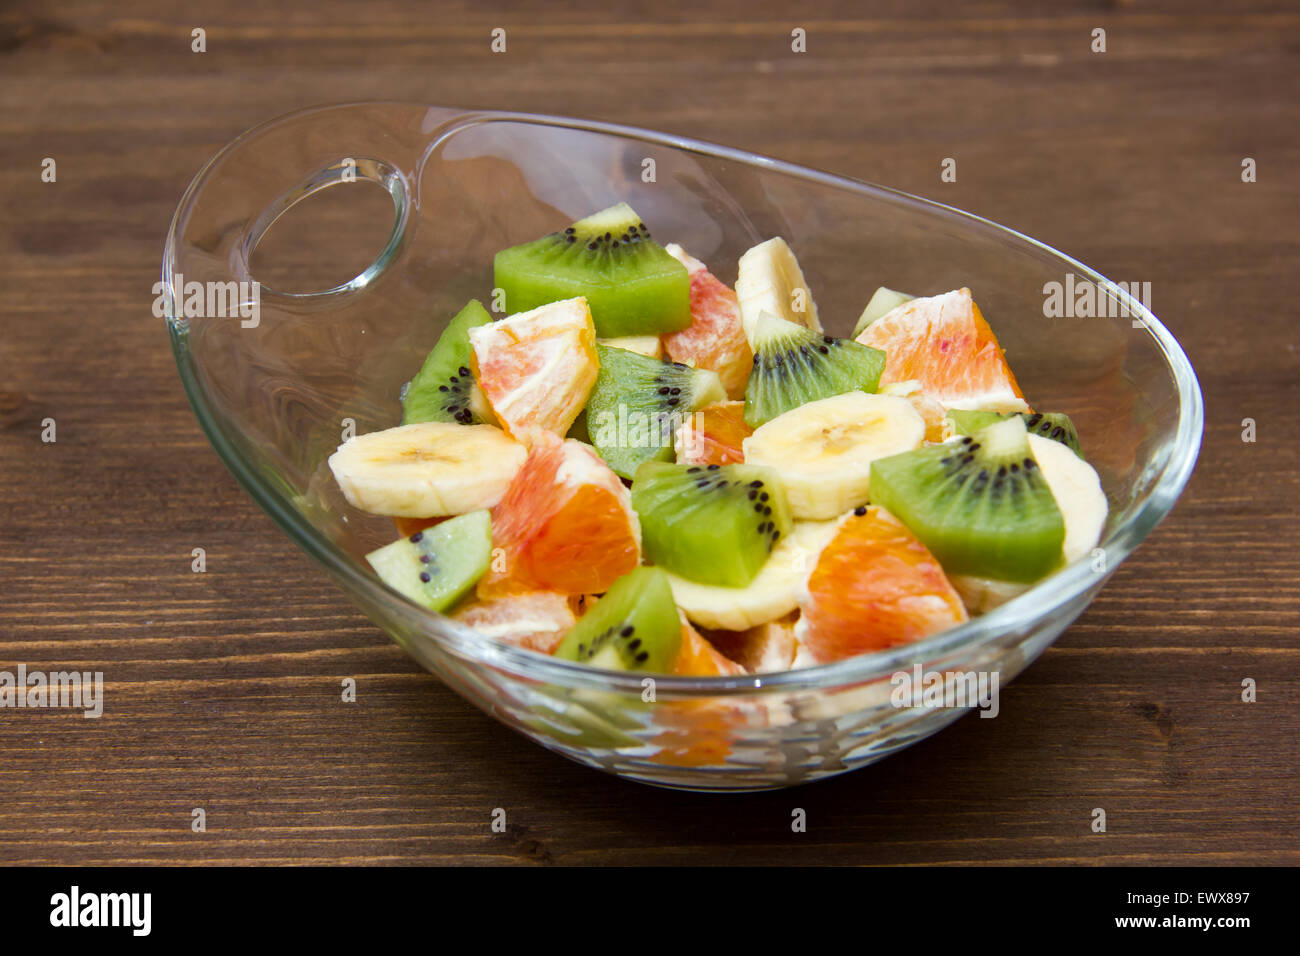 Bowl with cut fruit on wooden table Stock Photo